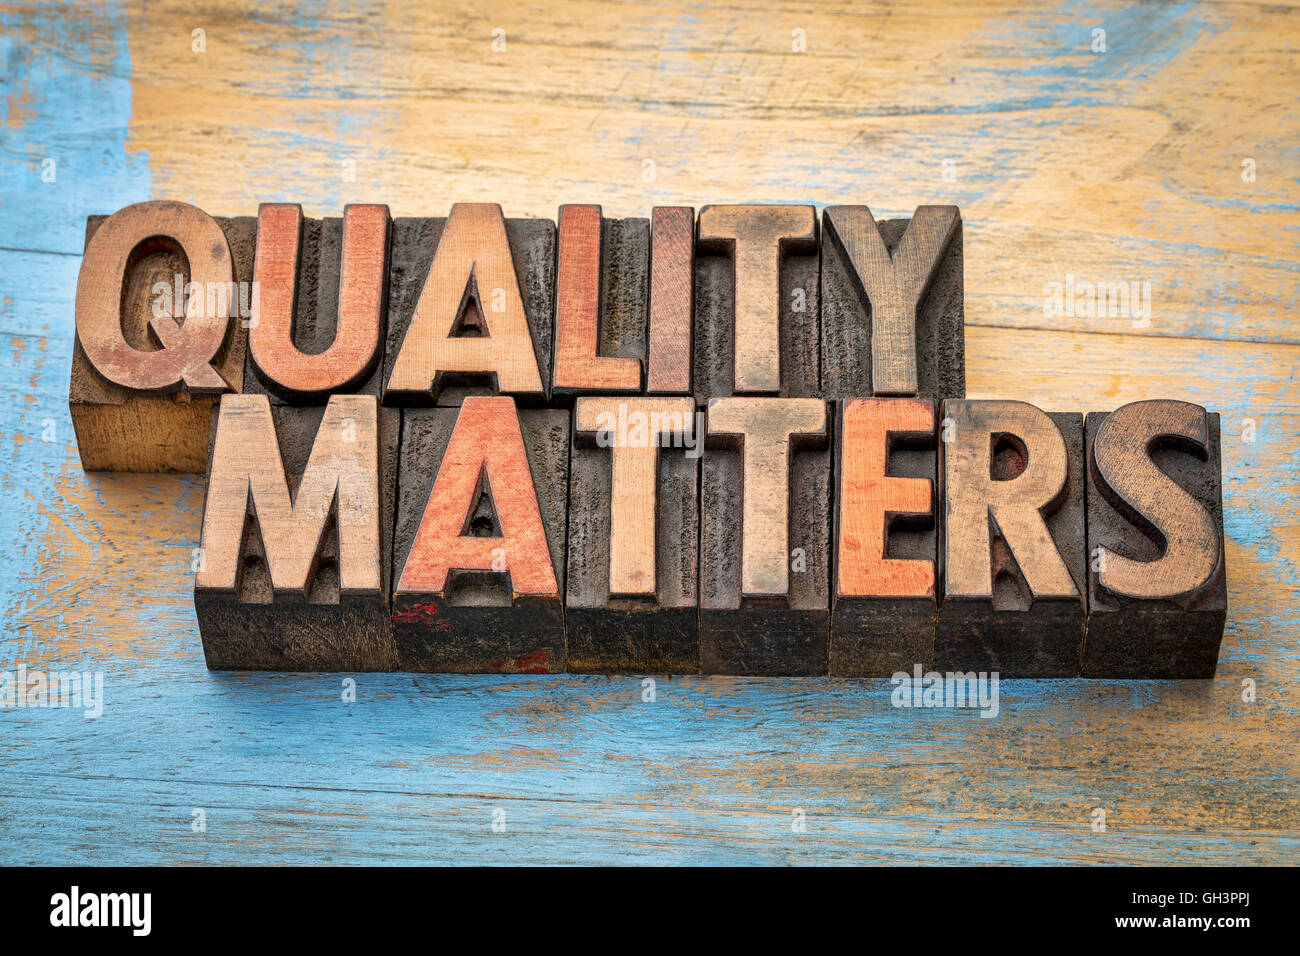 quality matters word abstract - text in vintage letterpress wood type printing blocks Stock Photo